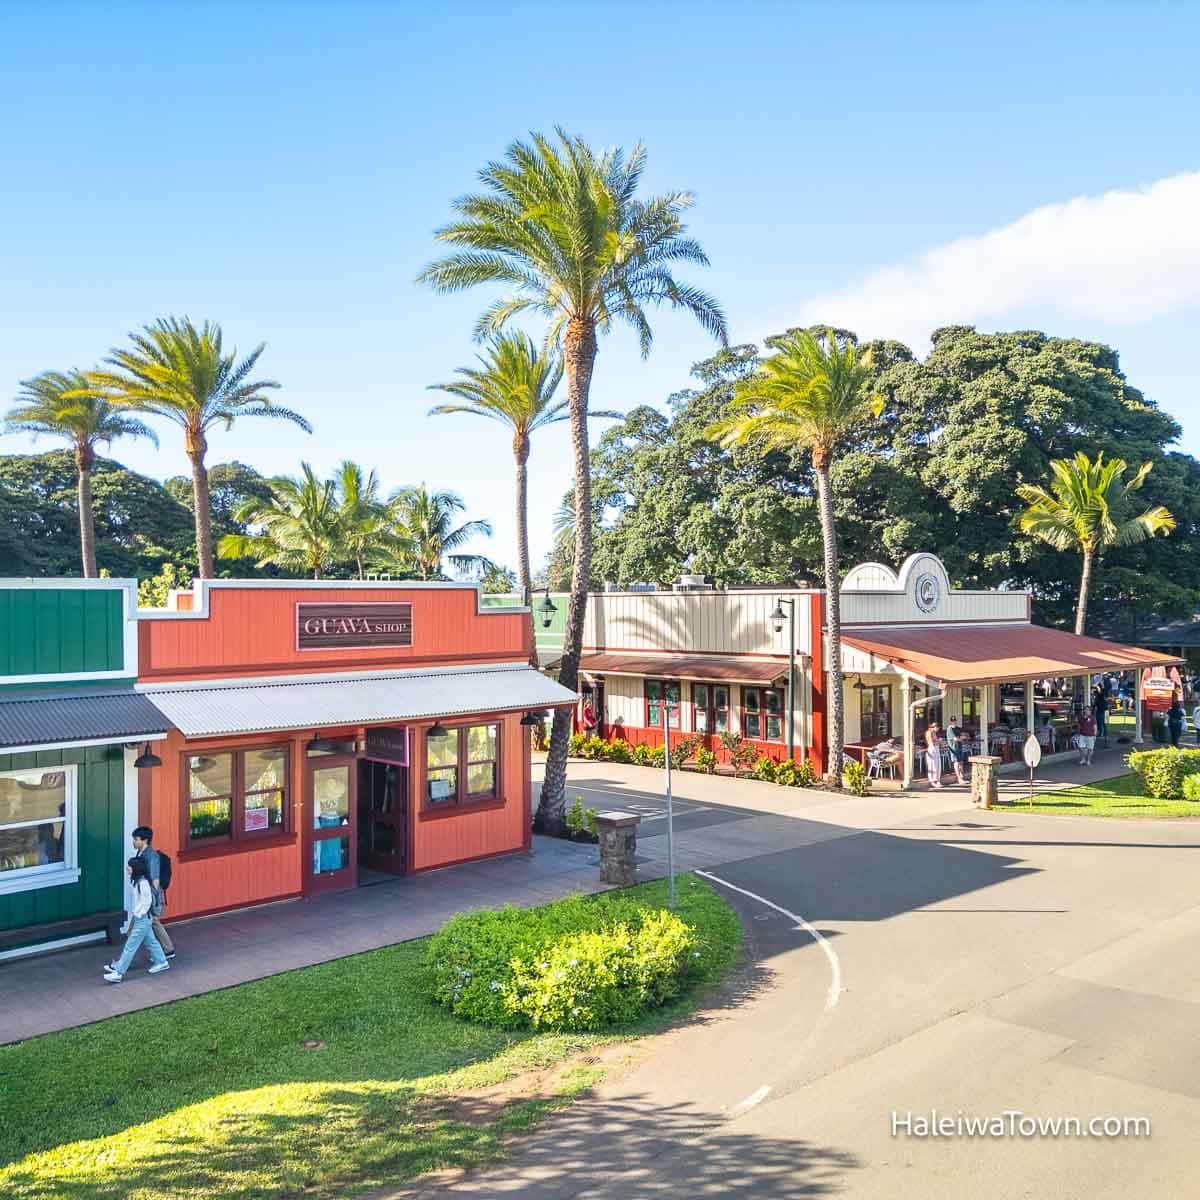 center of haleiwa town with a green, red, and tan building with restaurants and shops, palm trees and people on the sidewalks